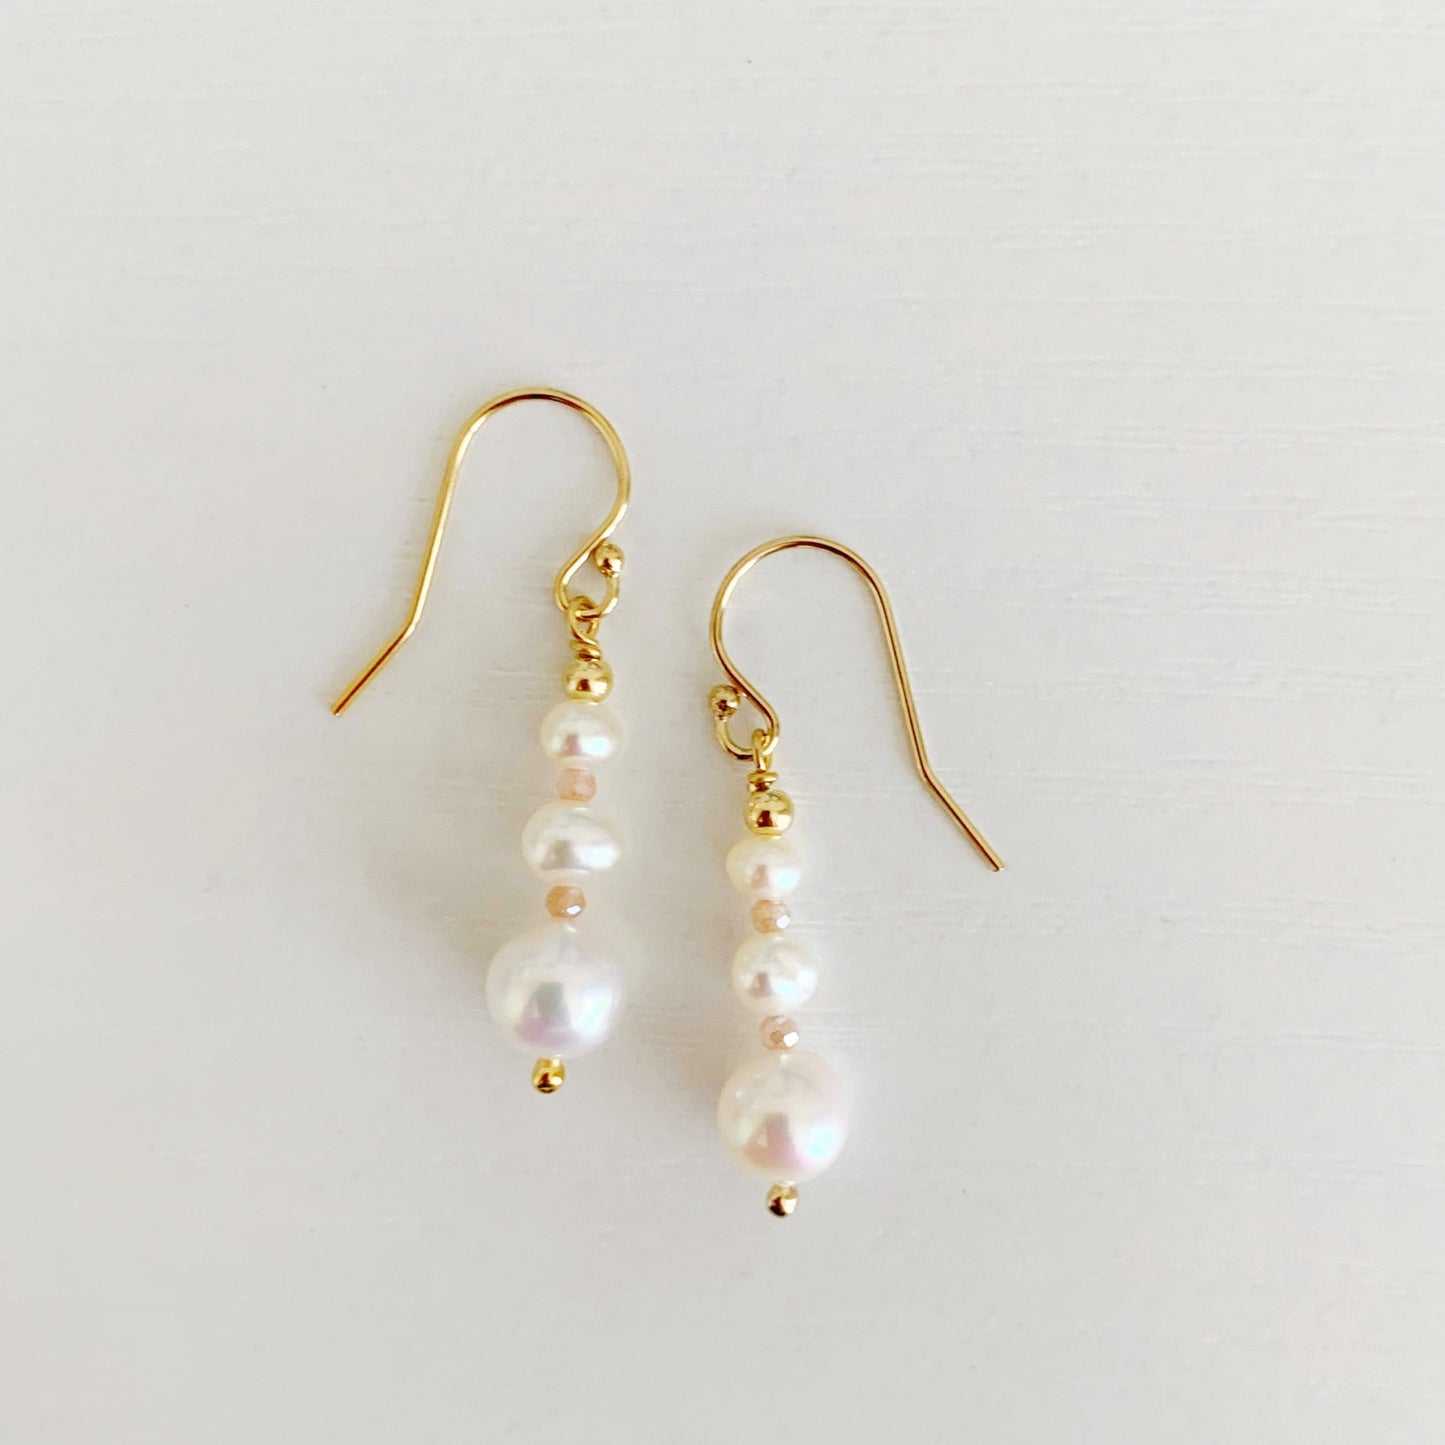 Barrington earrings by mermaids and madeleines feature freshwater pearls in a linear taper, with peach moonstone accents and 14k gold filled findings. this pair is photographed flat on a white surface with one earring placed slightly higher than the other on the surface